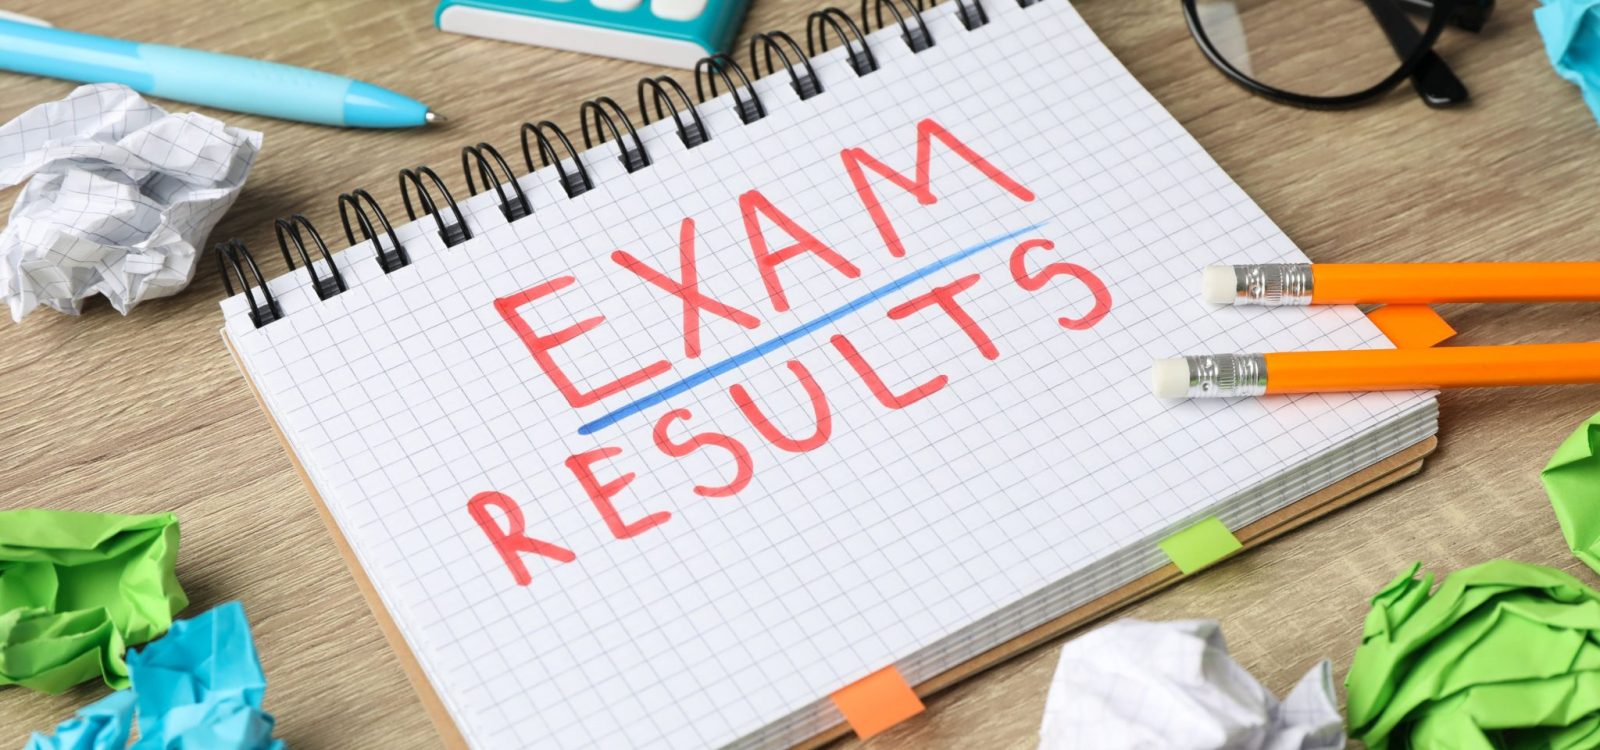 Strong exam results continue. Congratulations to all!